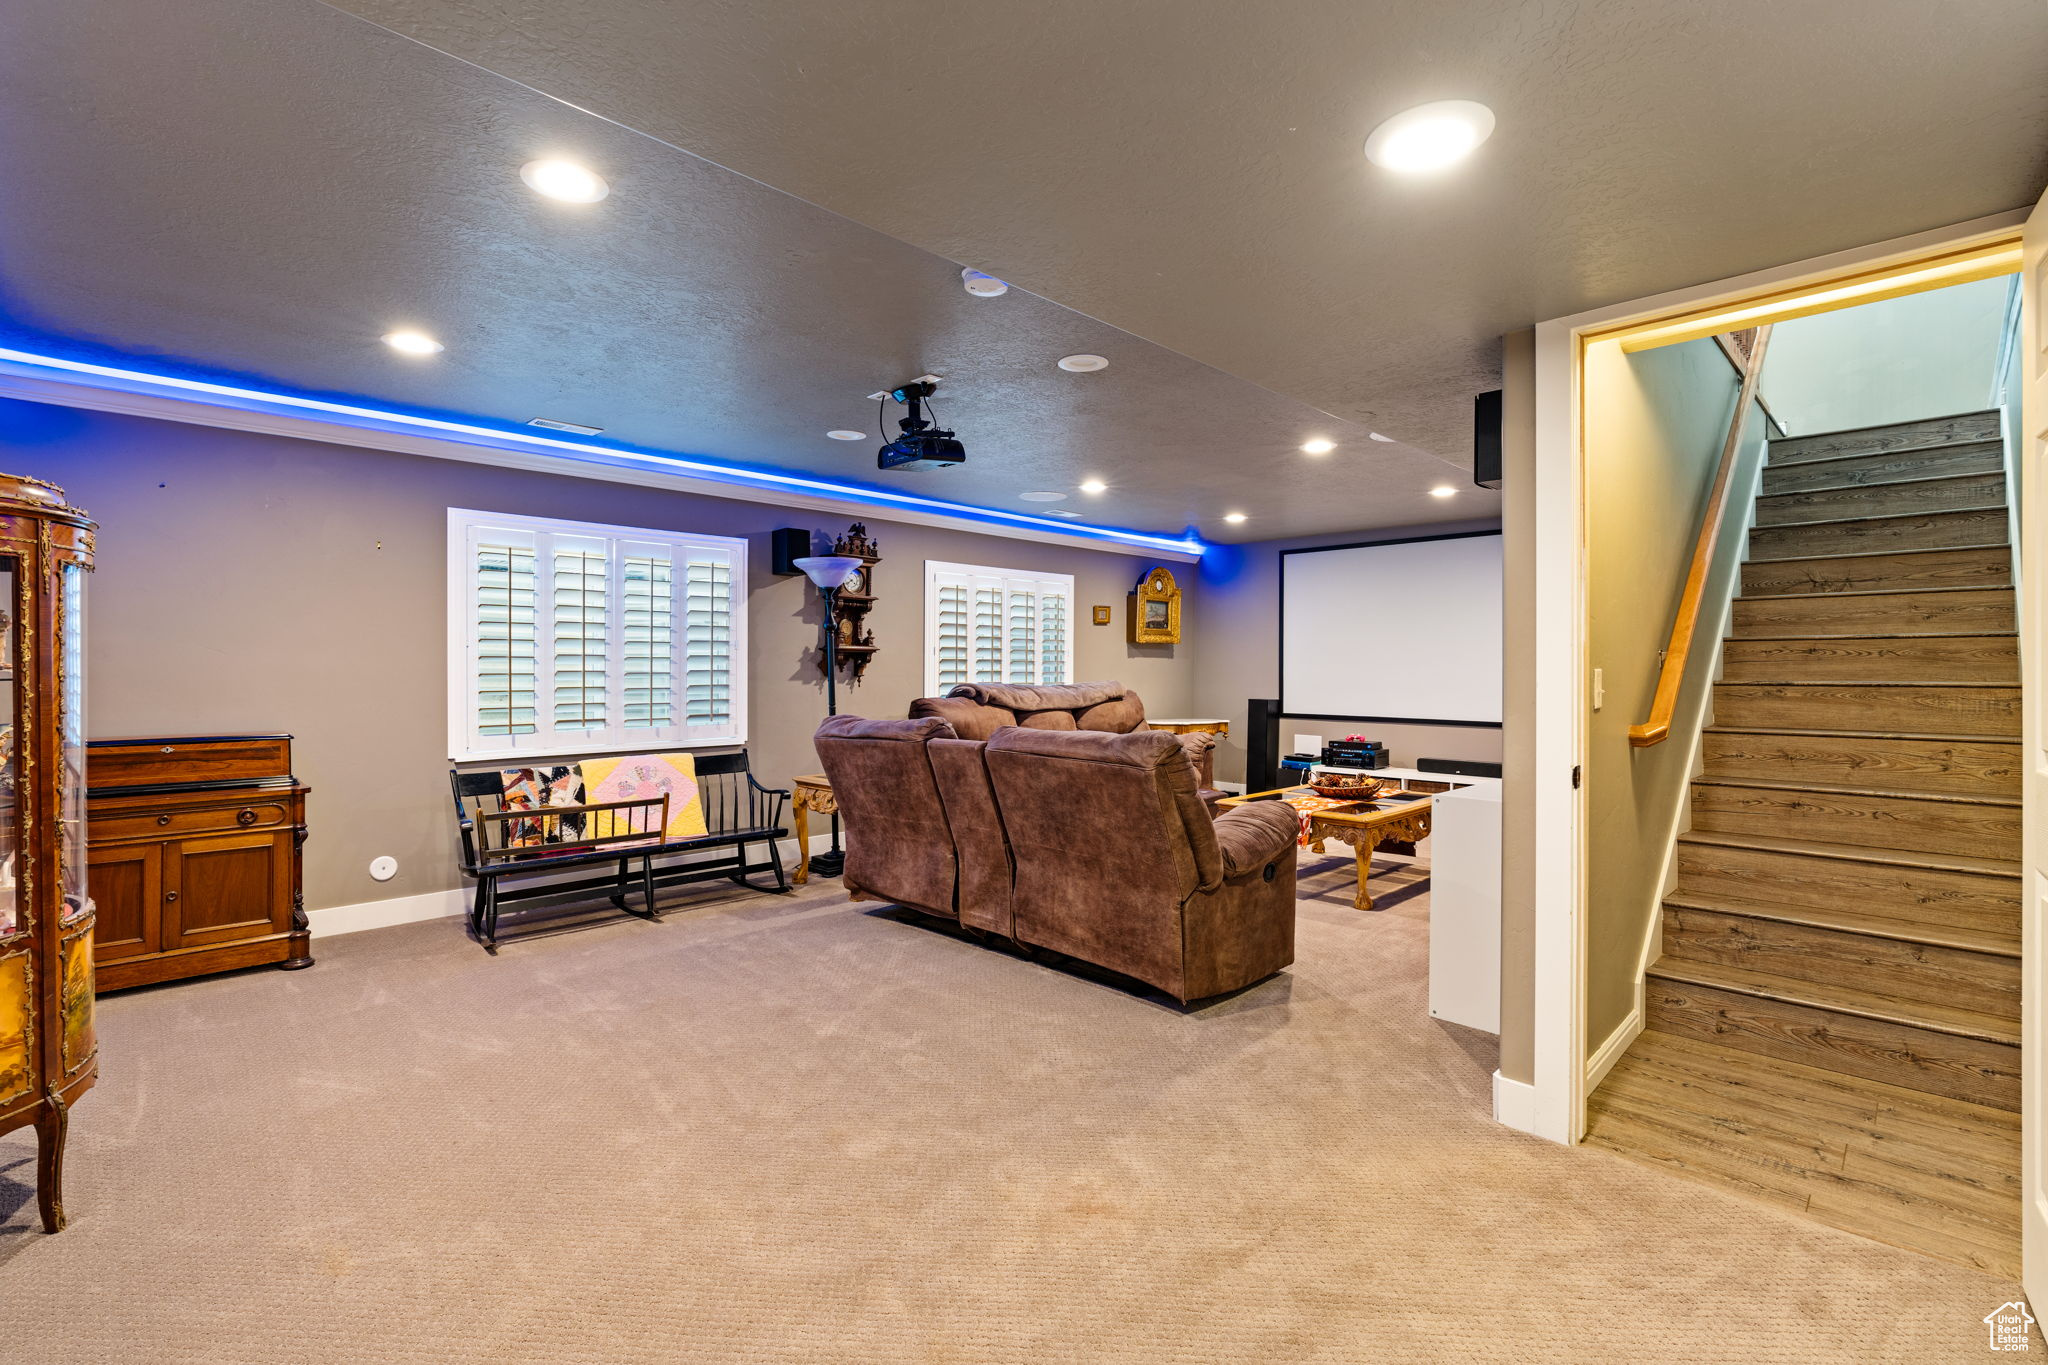 living room in basement with theater lighting and stairs